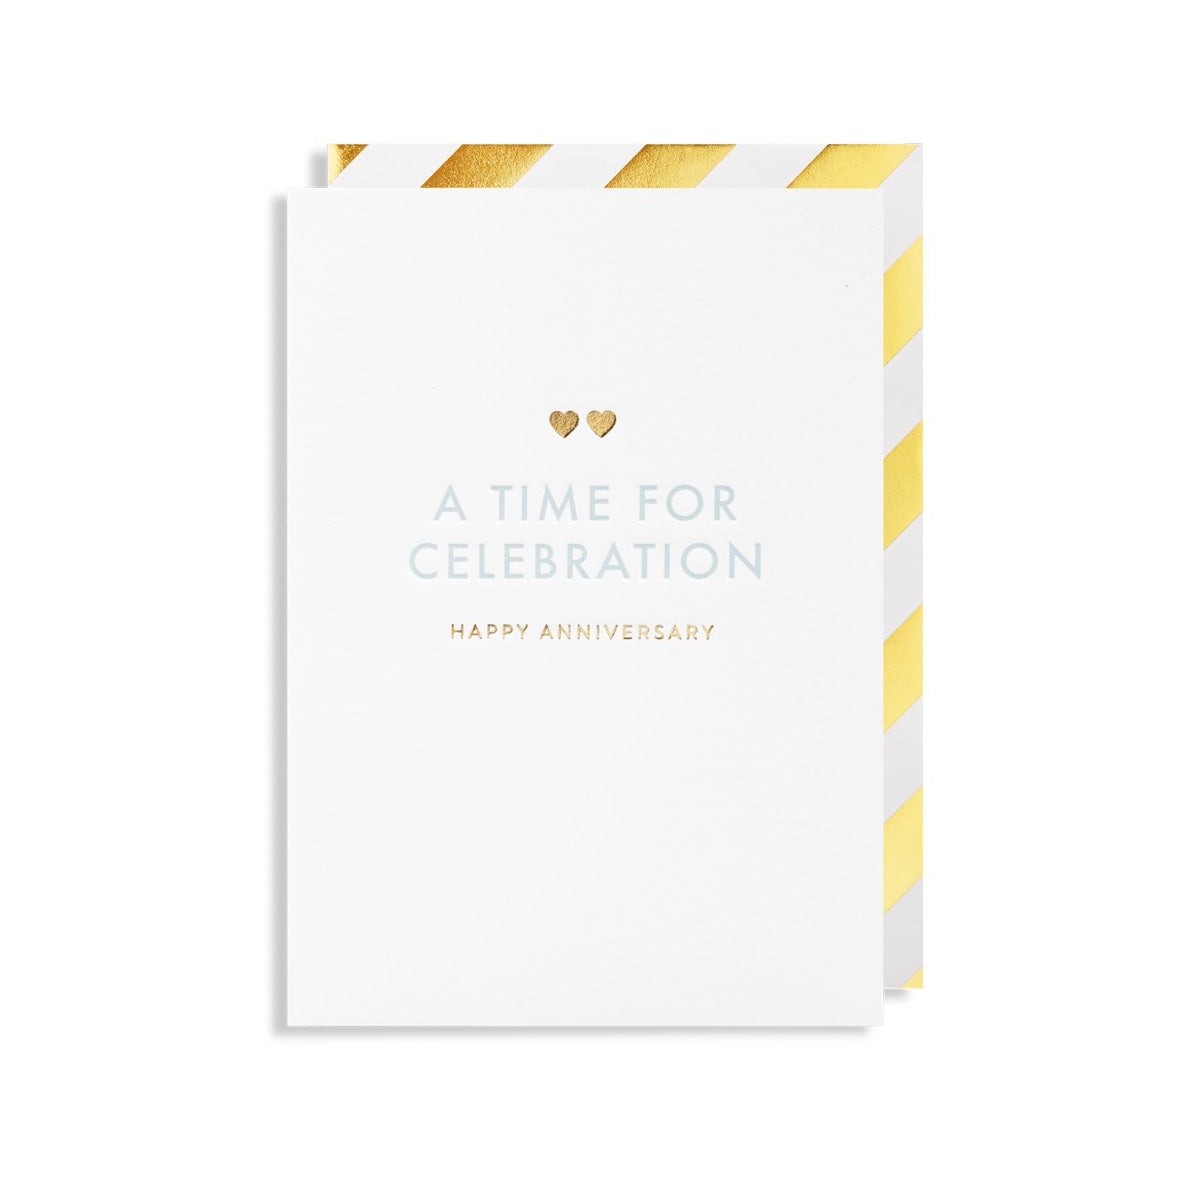 A Time for Celebration Greeting Card